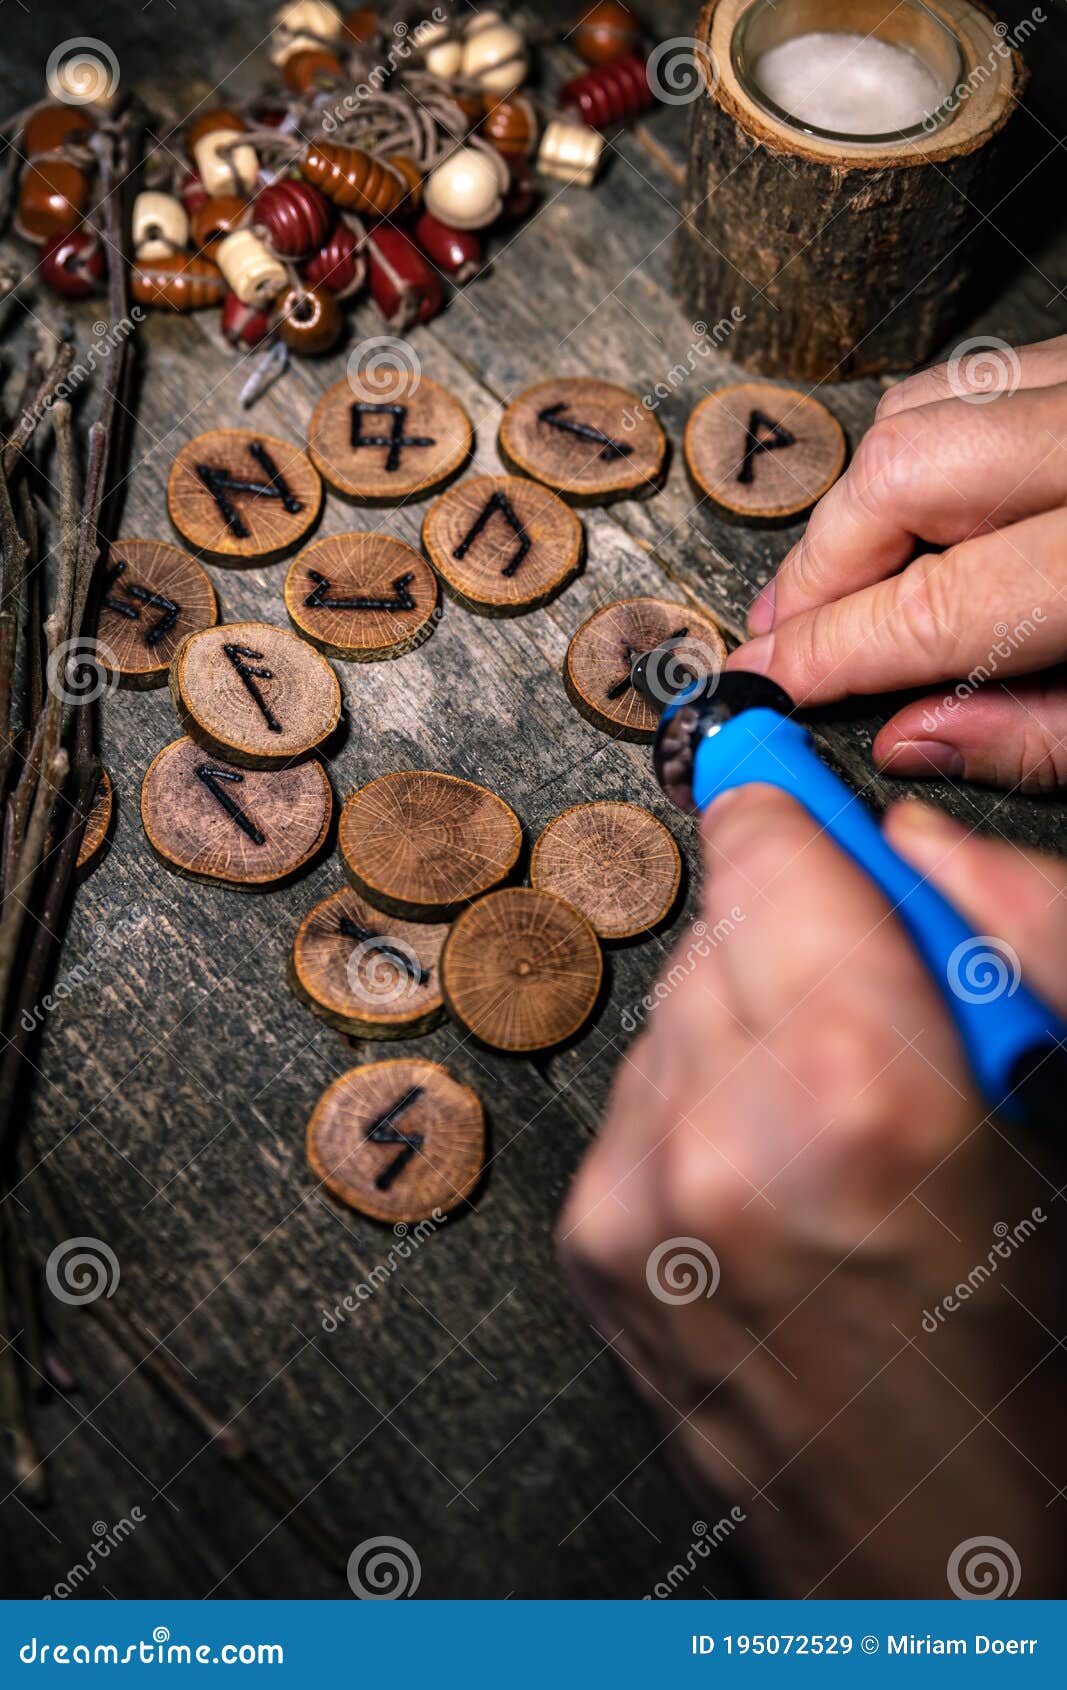 man writing wooden runes with an pyrography or pokerwork, esoteric background